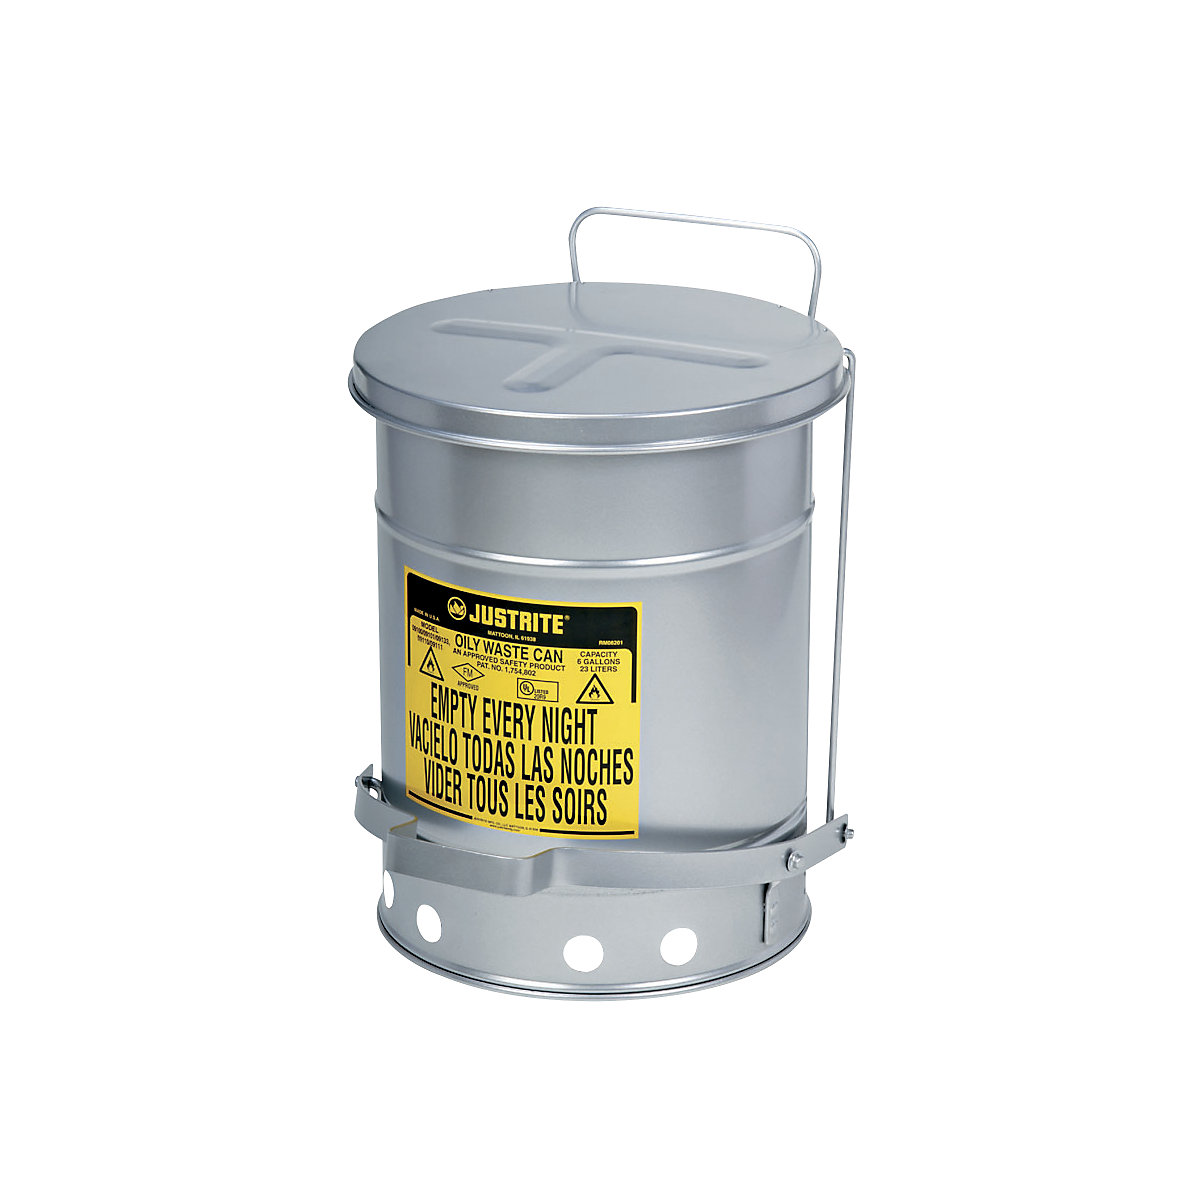 Low noise SoundGard™ safety disposal cans - Justrite